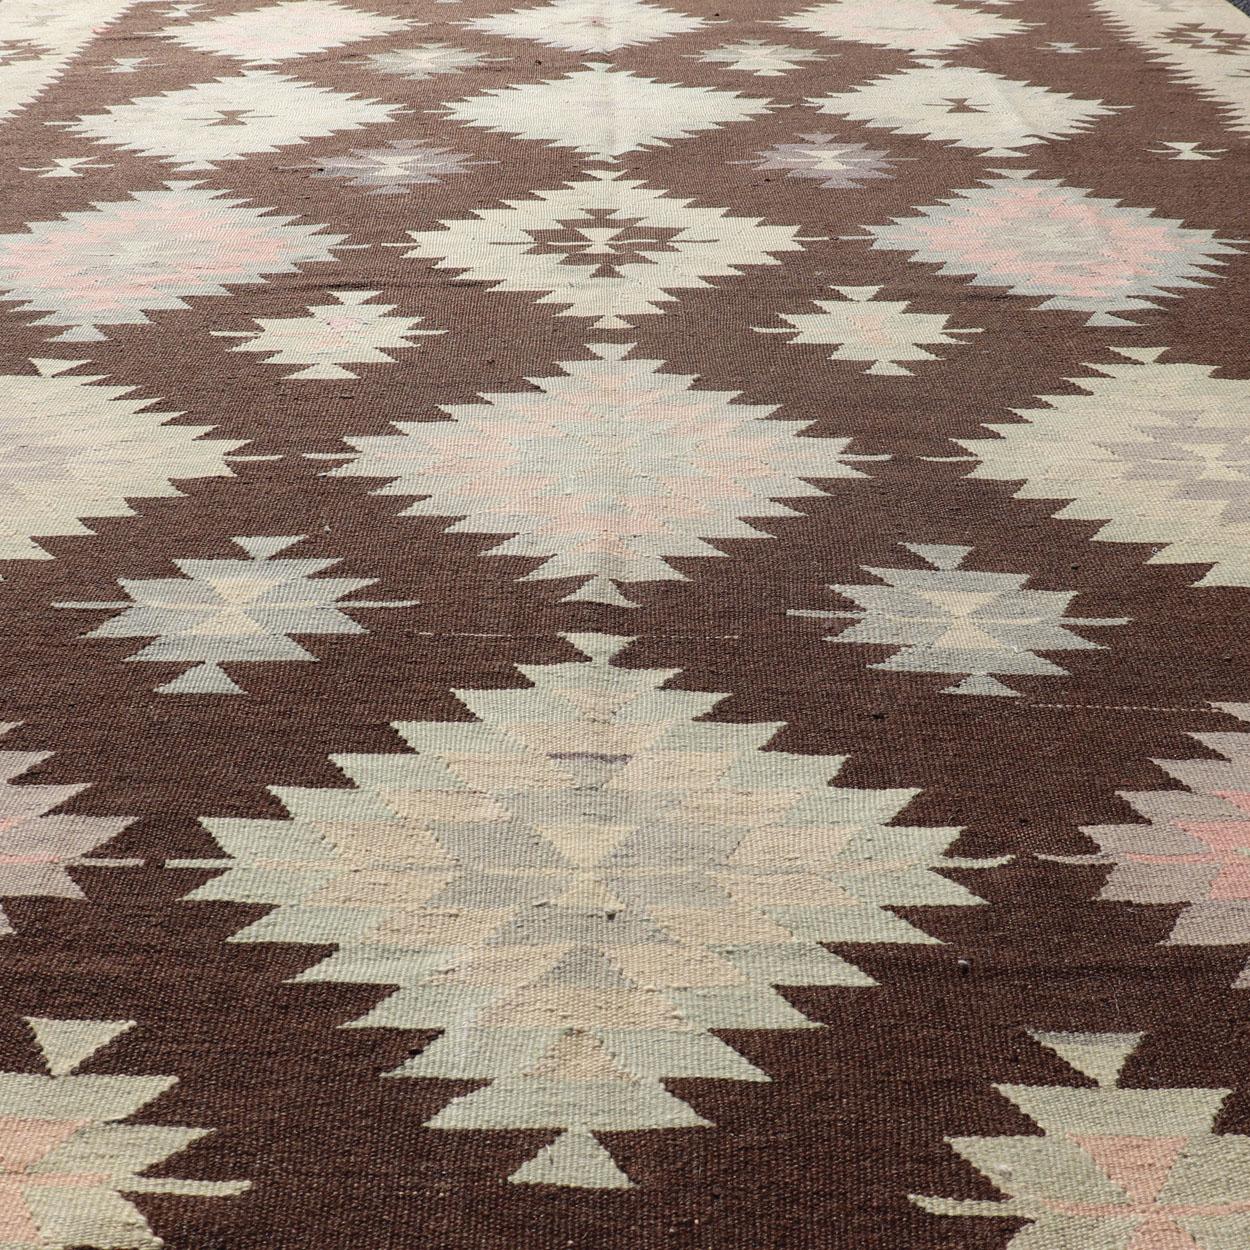 Tribal and Geometrics Turkish Kilim in Brown with Cream, Pink, Light Gray/Blue For Sale 3